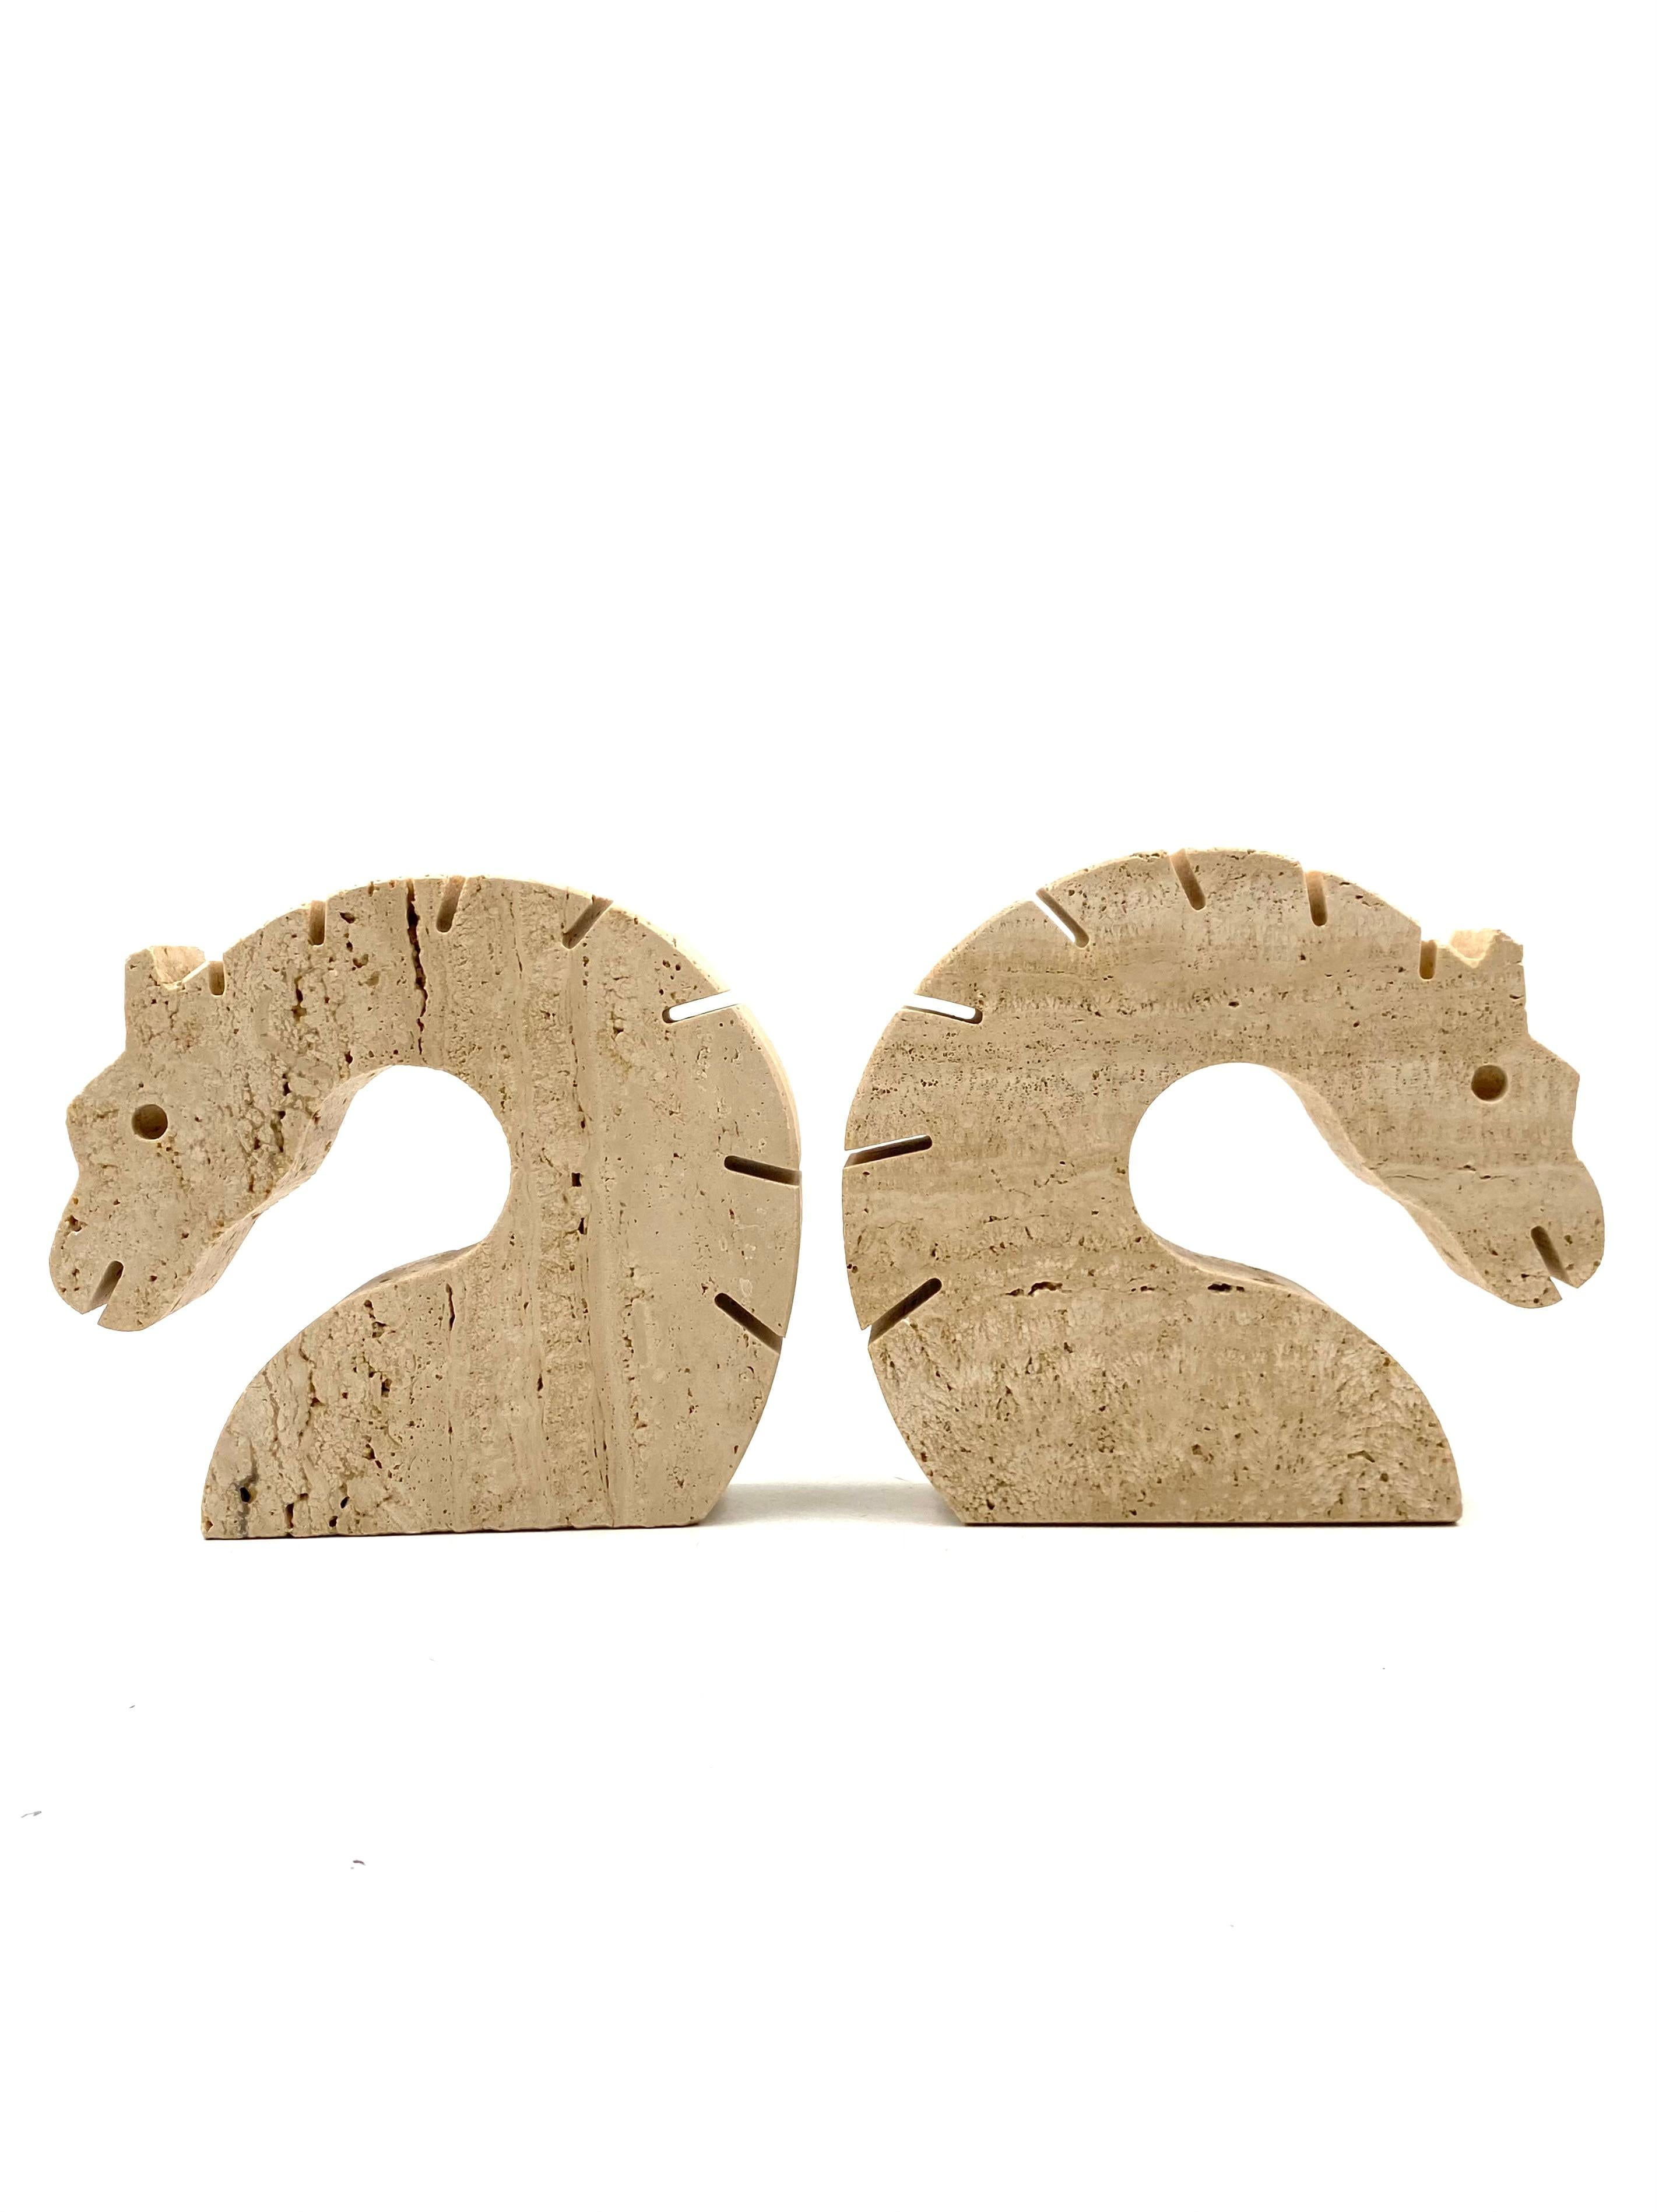 Brutalist Horses / Dragons Travertine Bookends, Fratelli Mannelli, Italy, 1970s For Sale 1